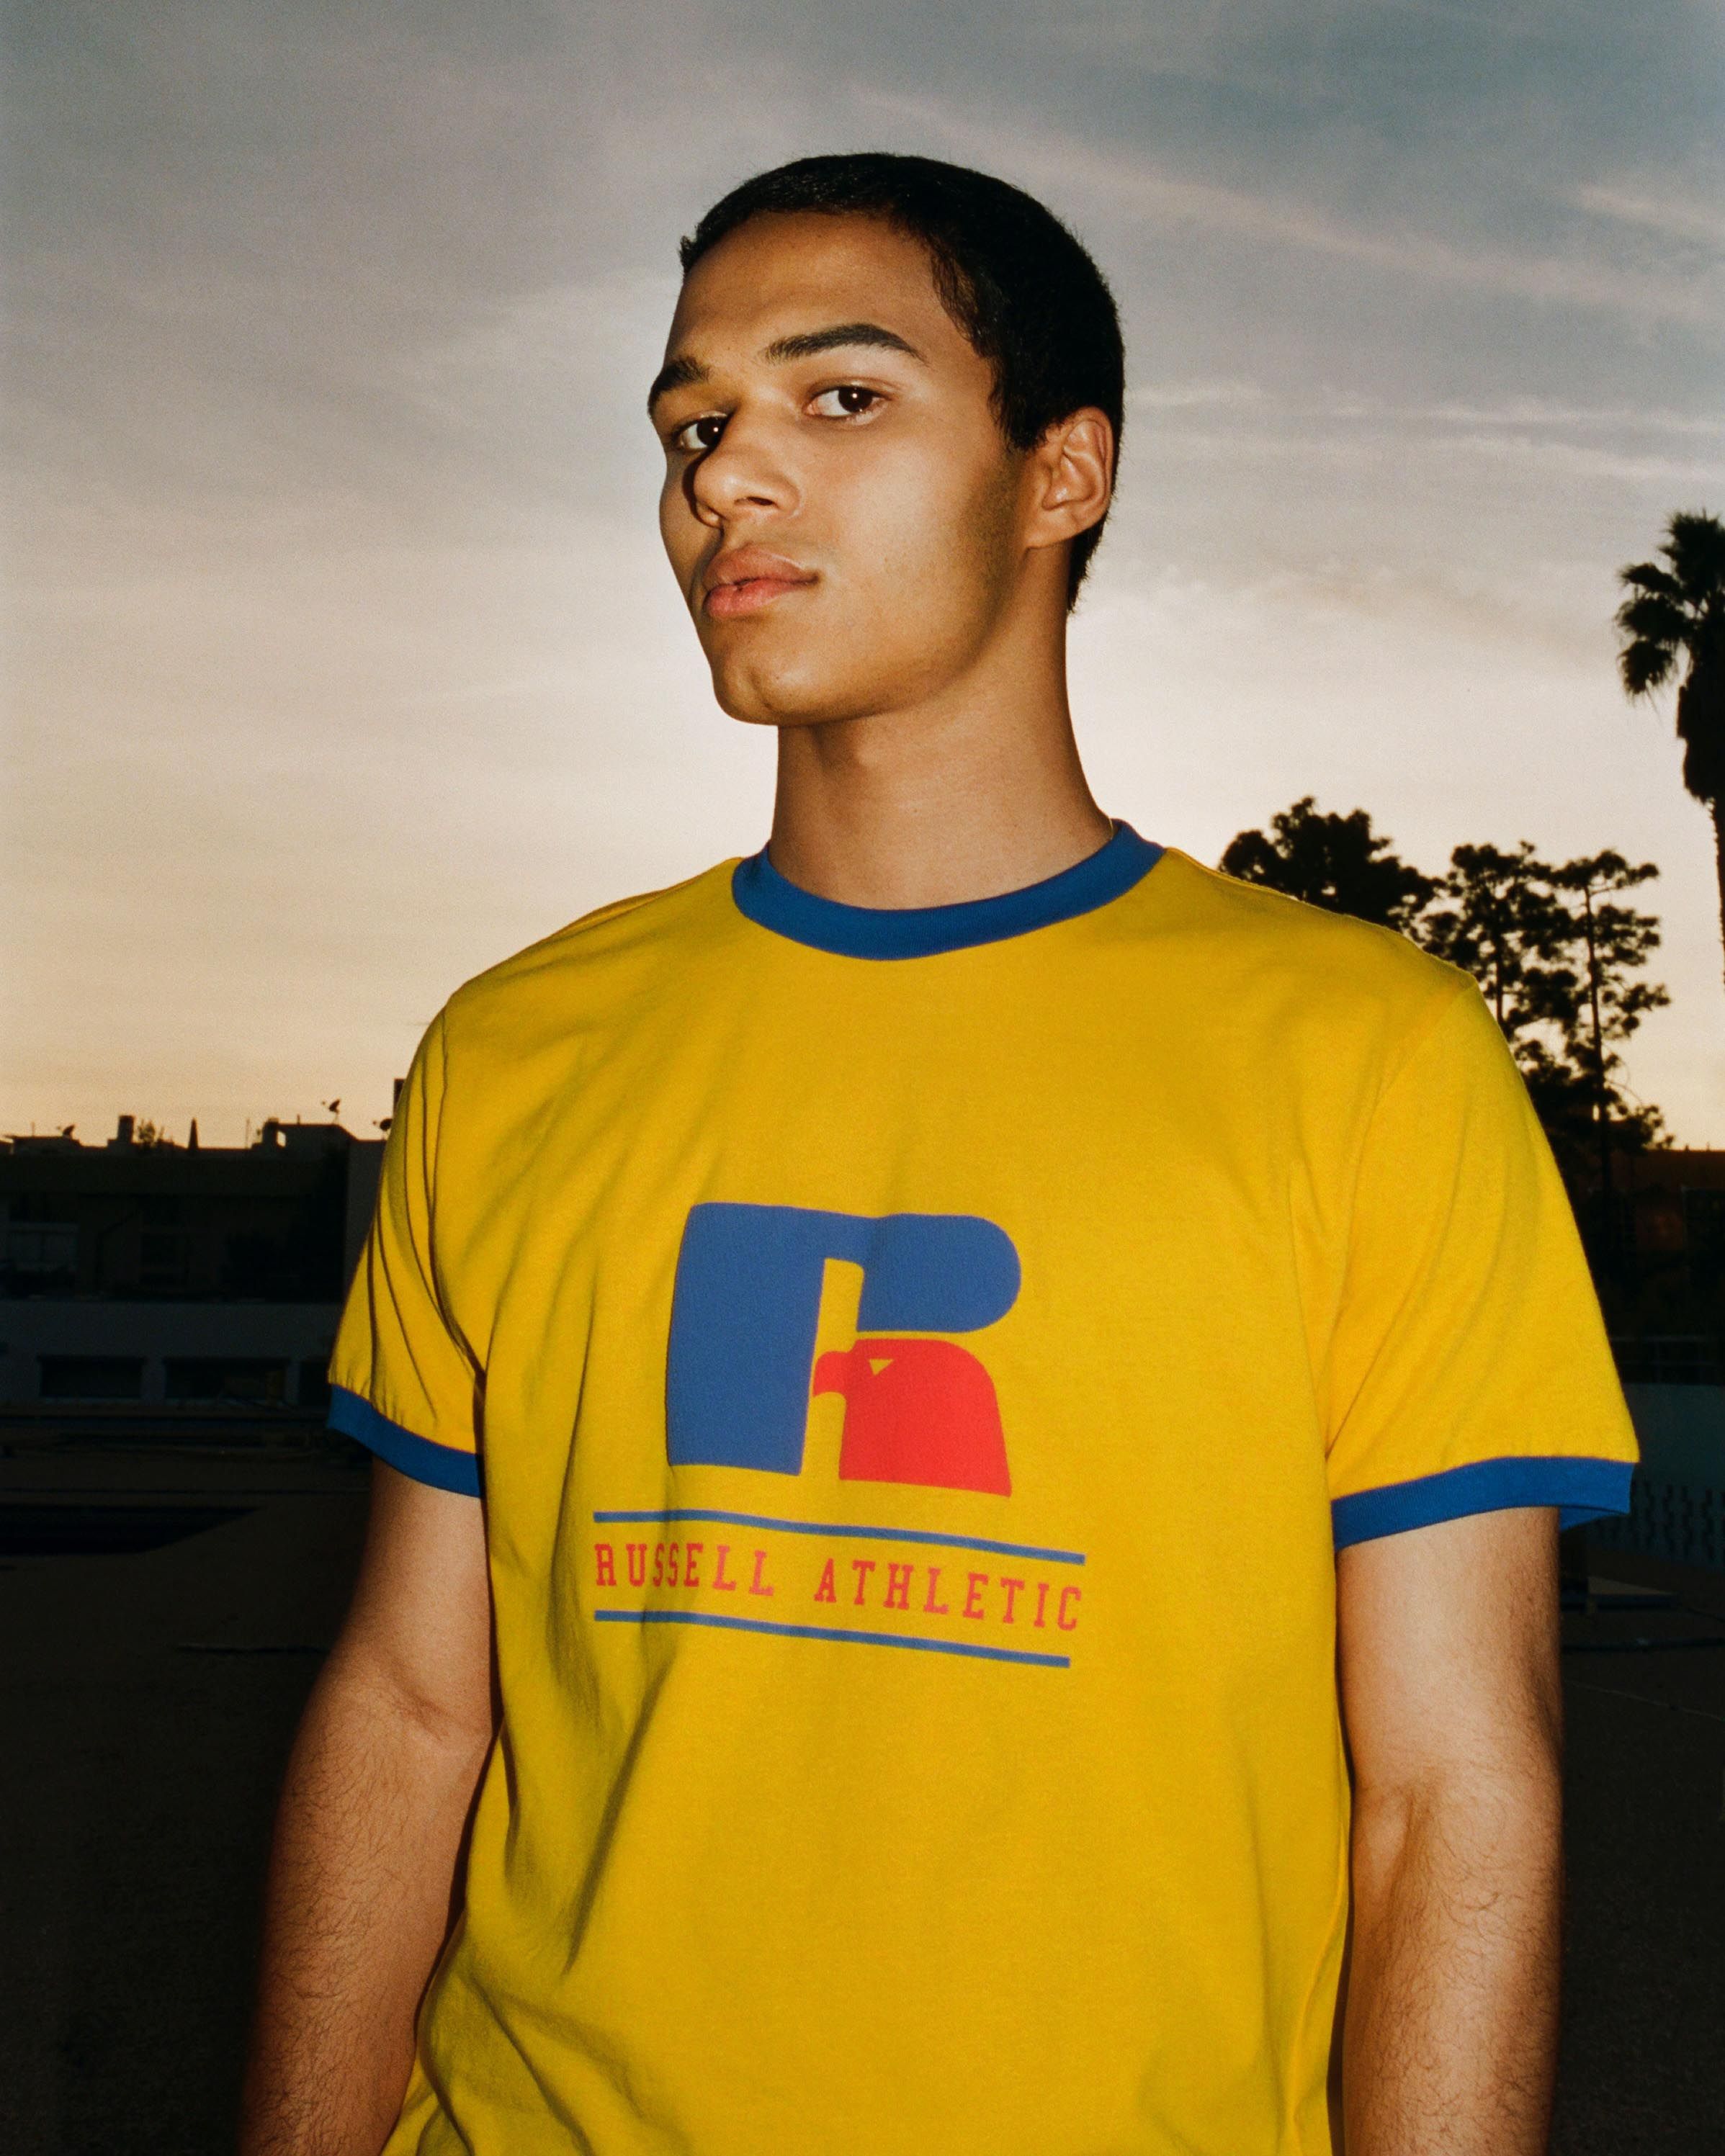 Russell Athletic Launches Streetwear - Coolest Sportswear to Buy